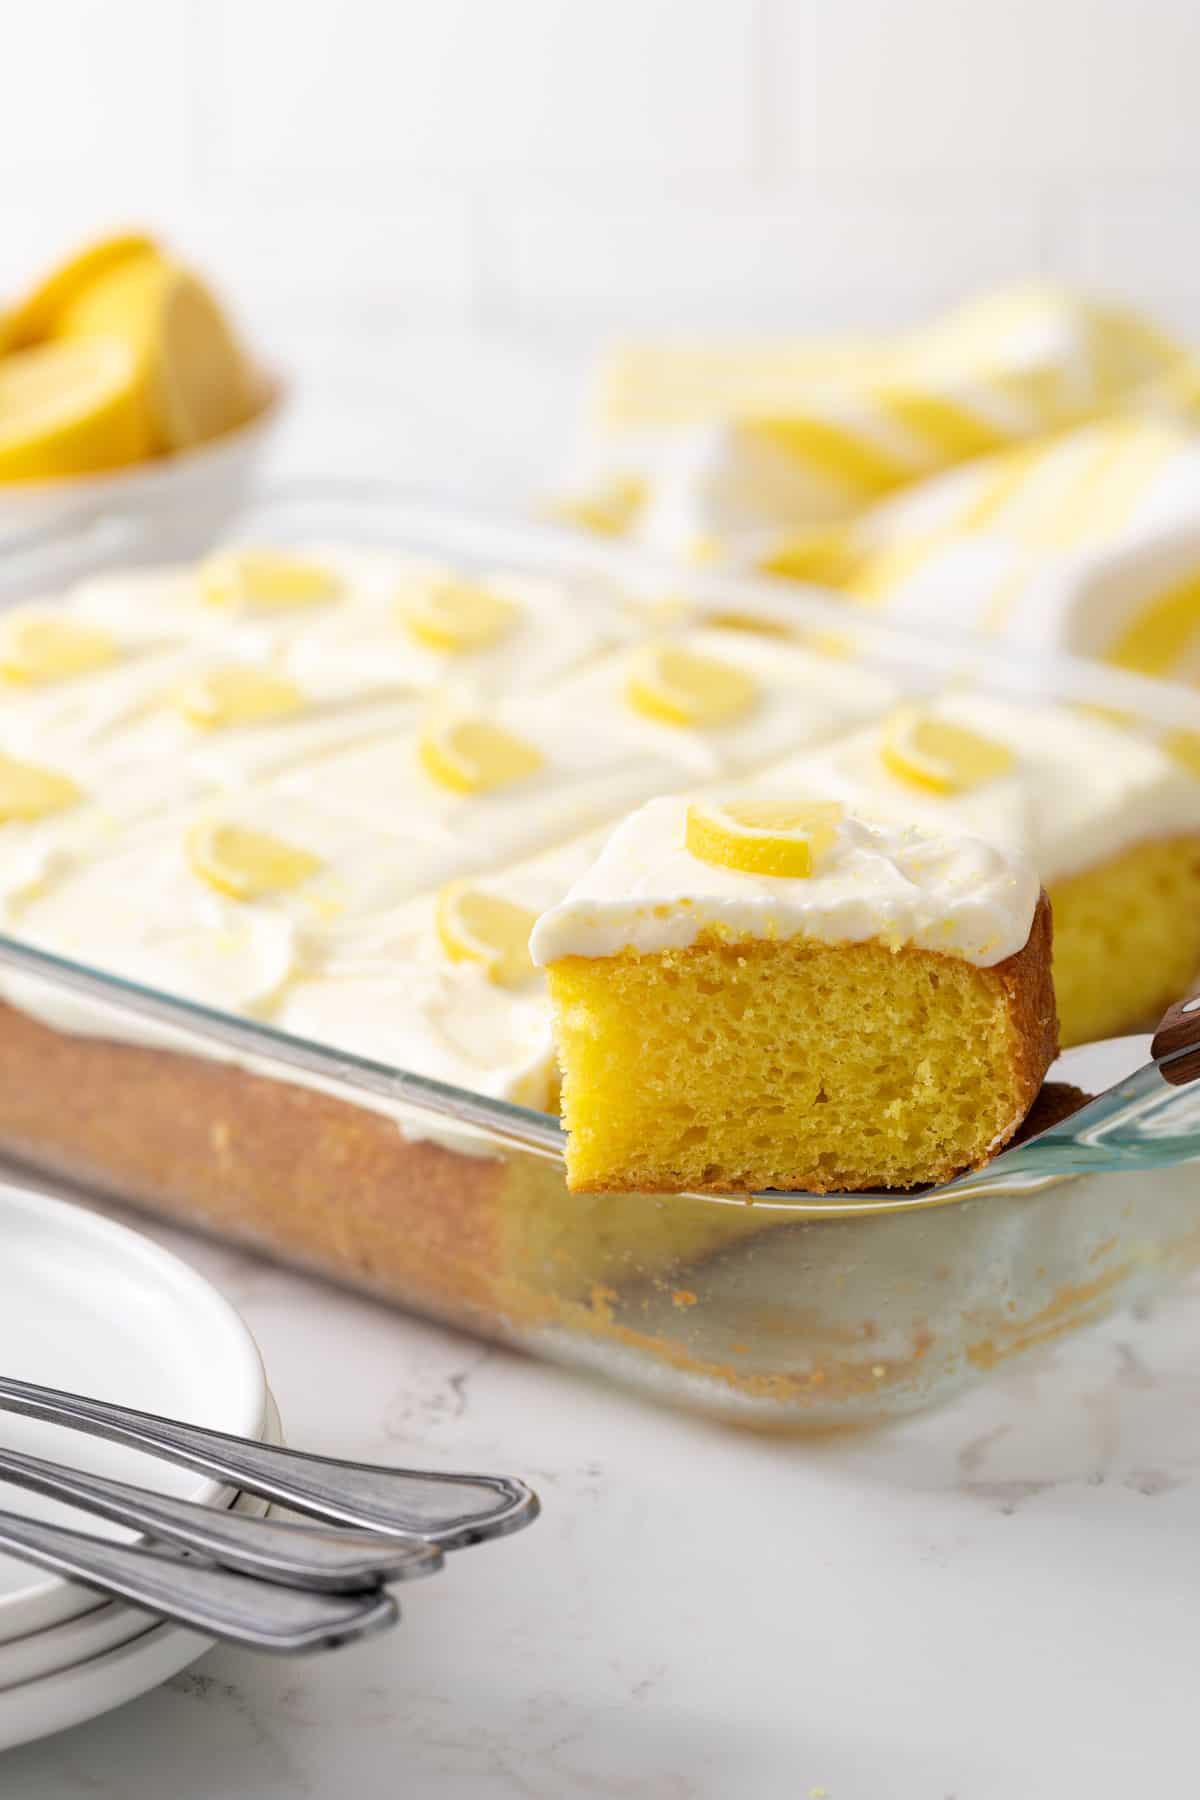 A spatula removing a slice of lemon sheet cake from a glass 13 x 9 baking dish.